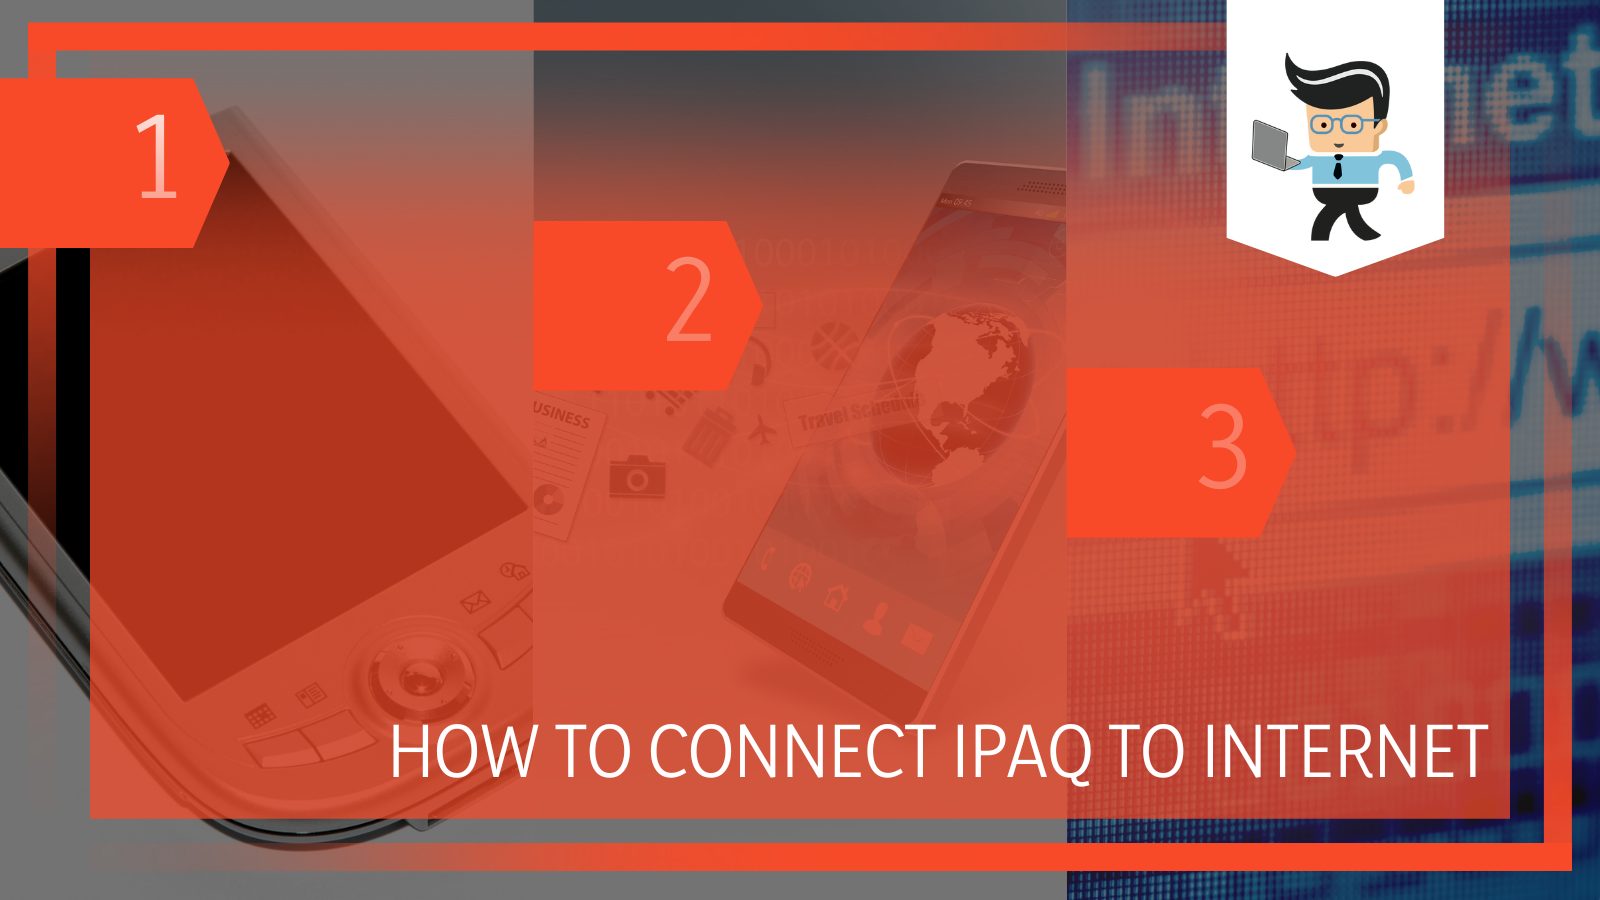 How To Connect iPAQ to Internet